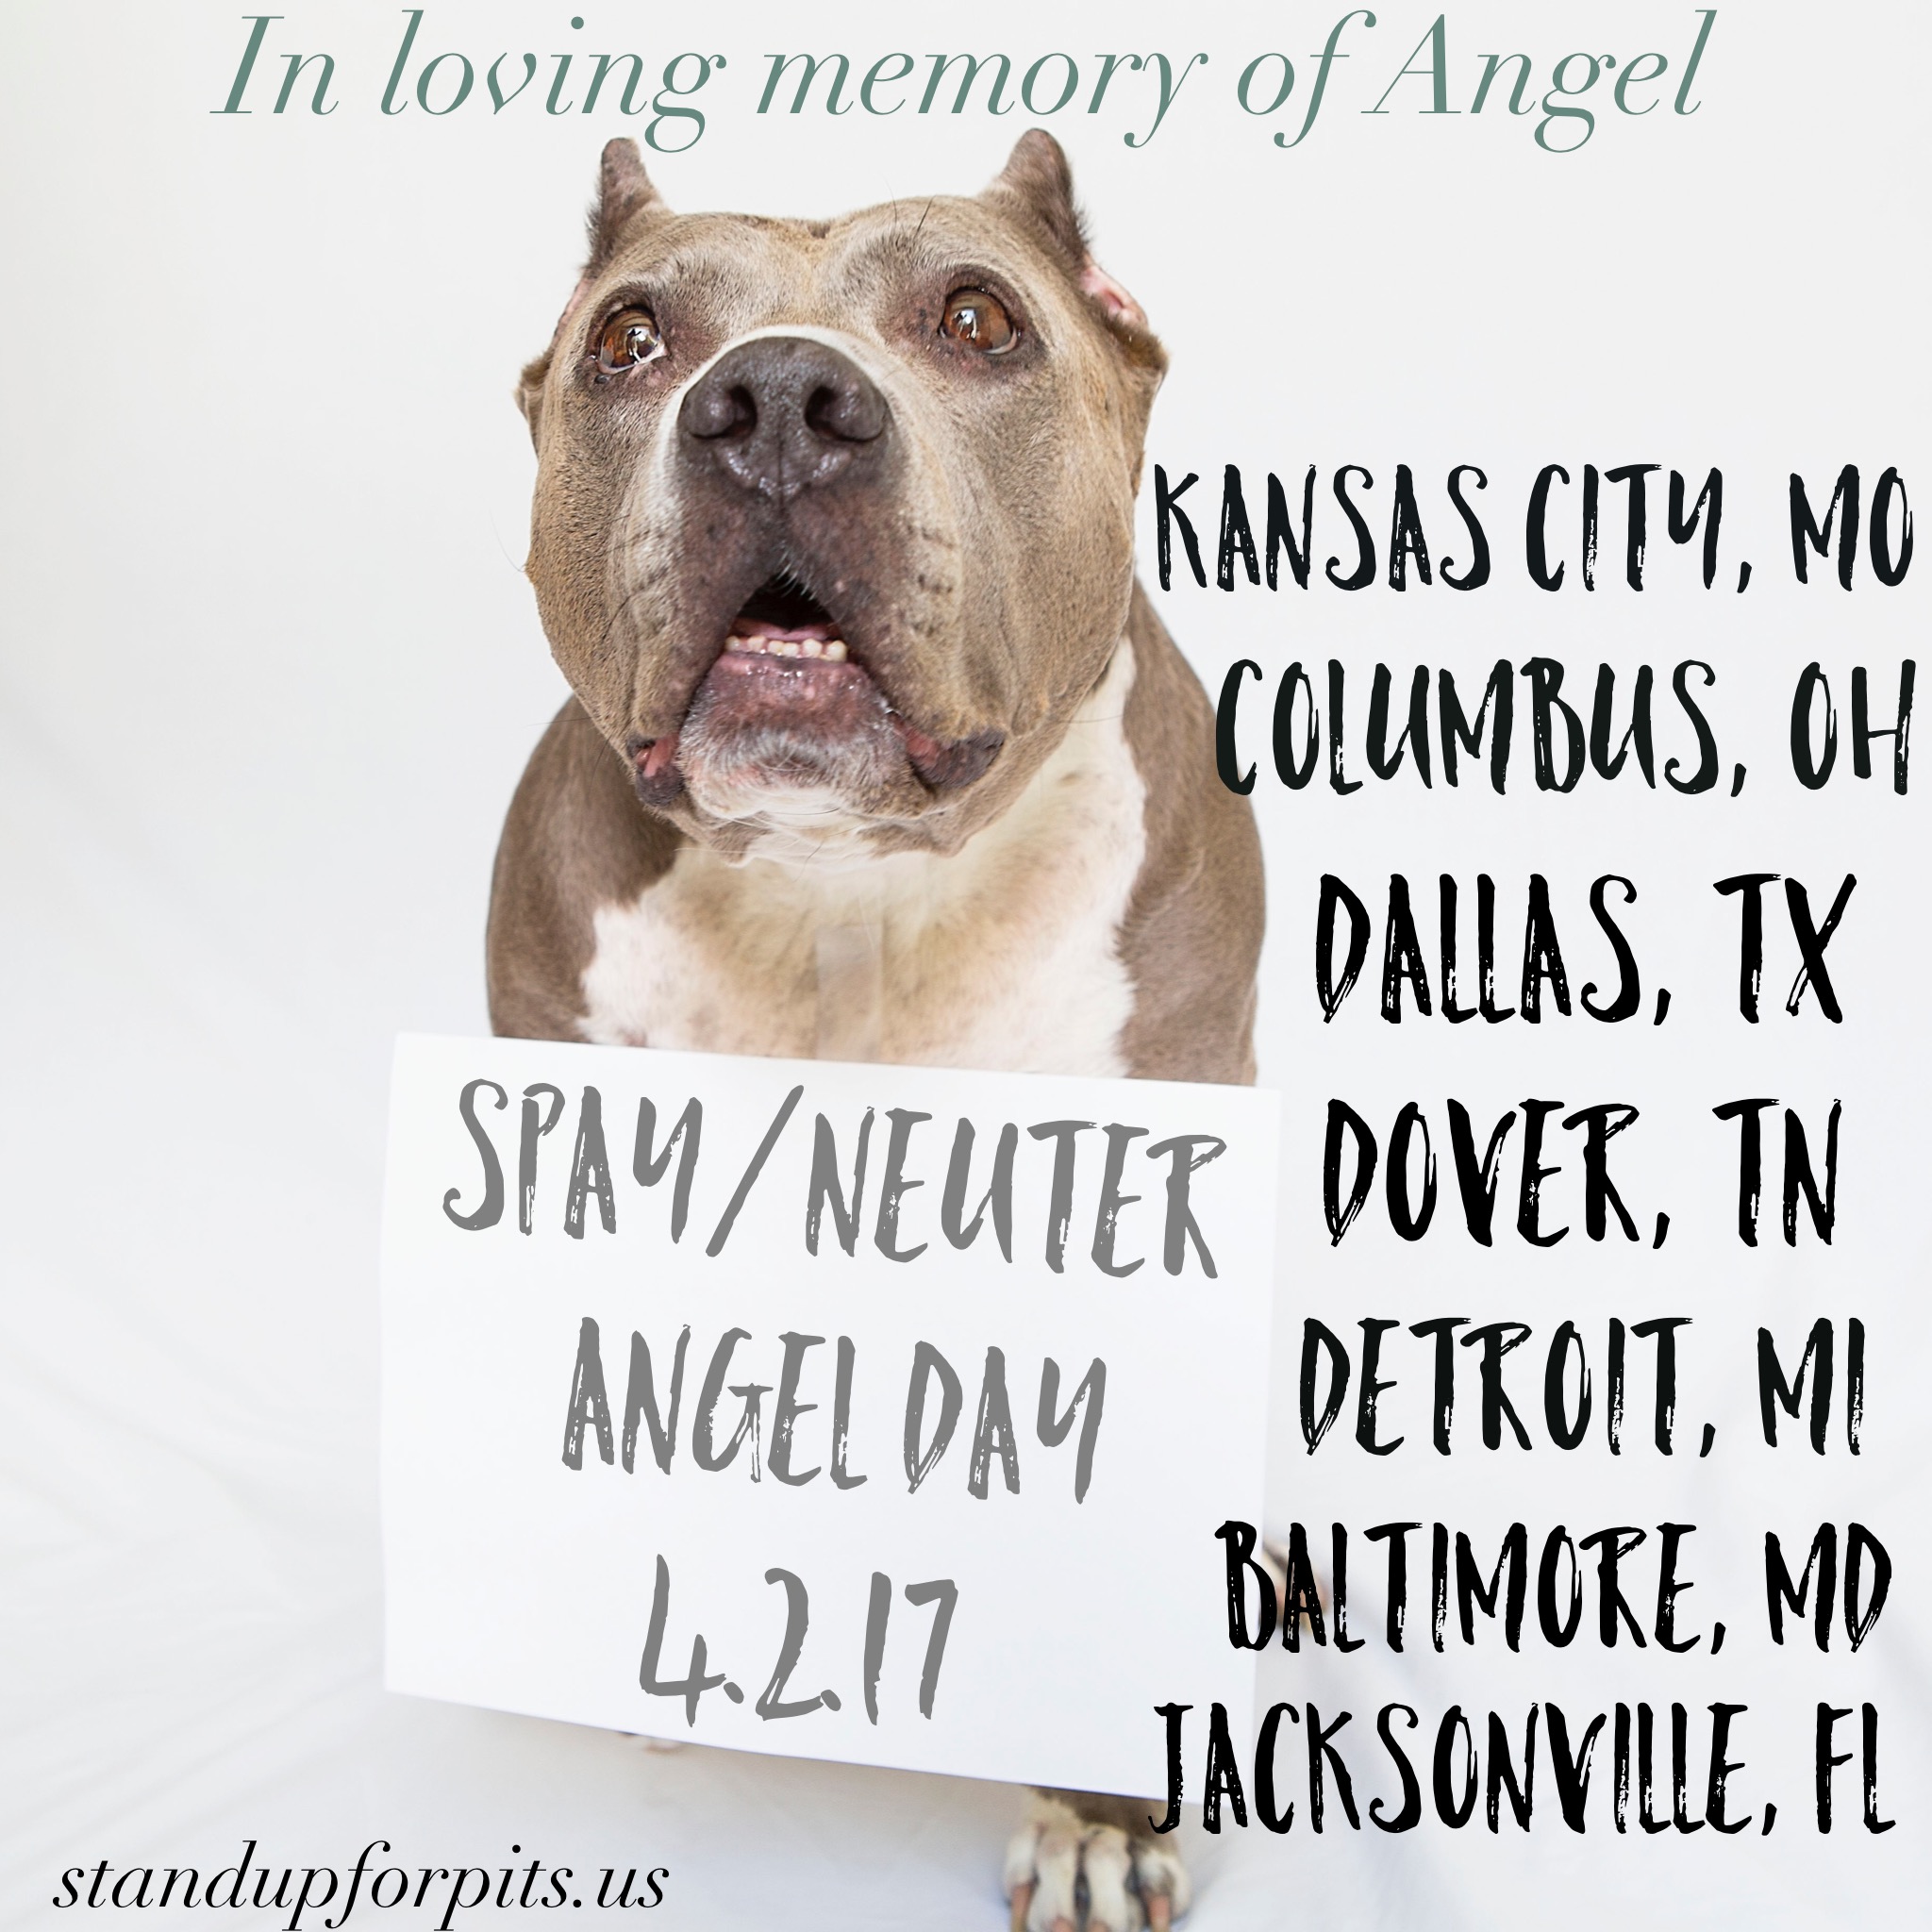 APRIL 2nd is Spay/Neuter ANGEL Day!!